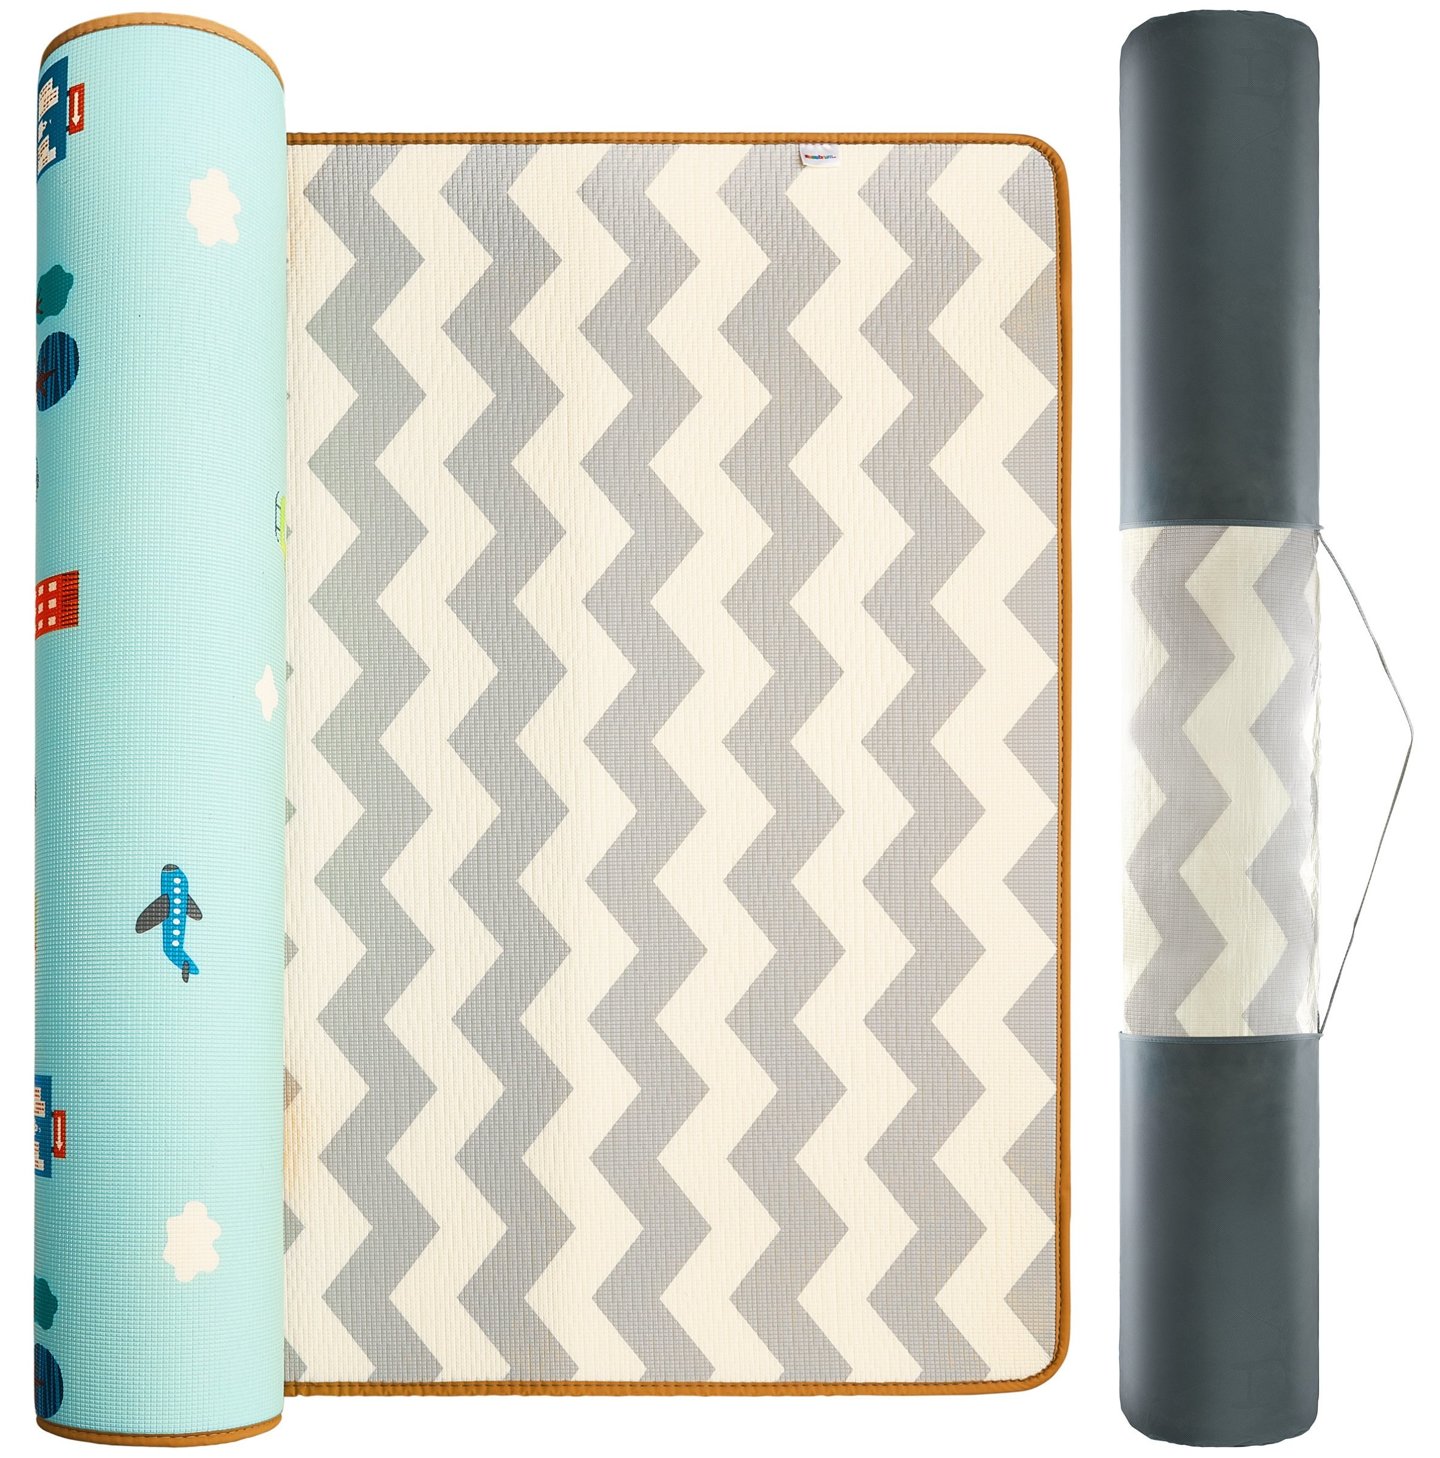 Double-sided foam mat XXL - roll 2 cm (patterns: road and zigzags)